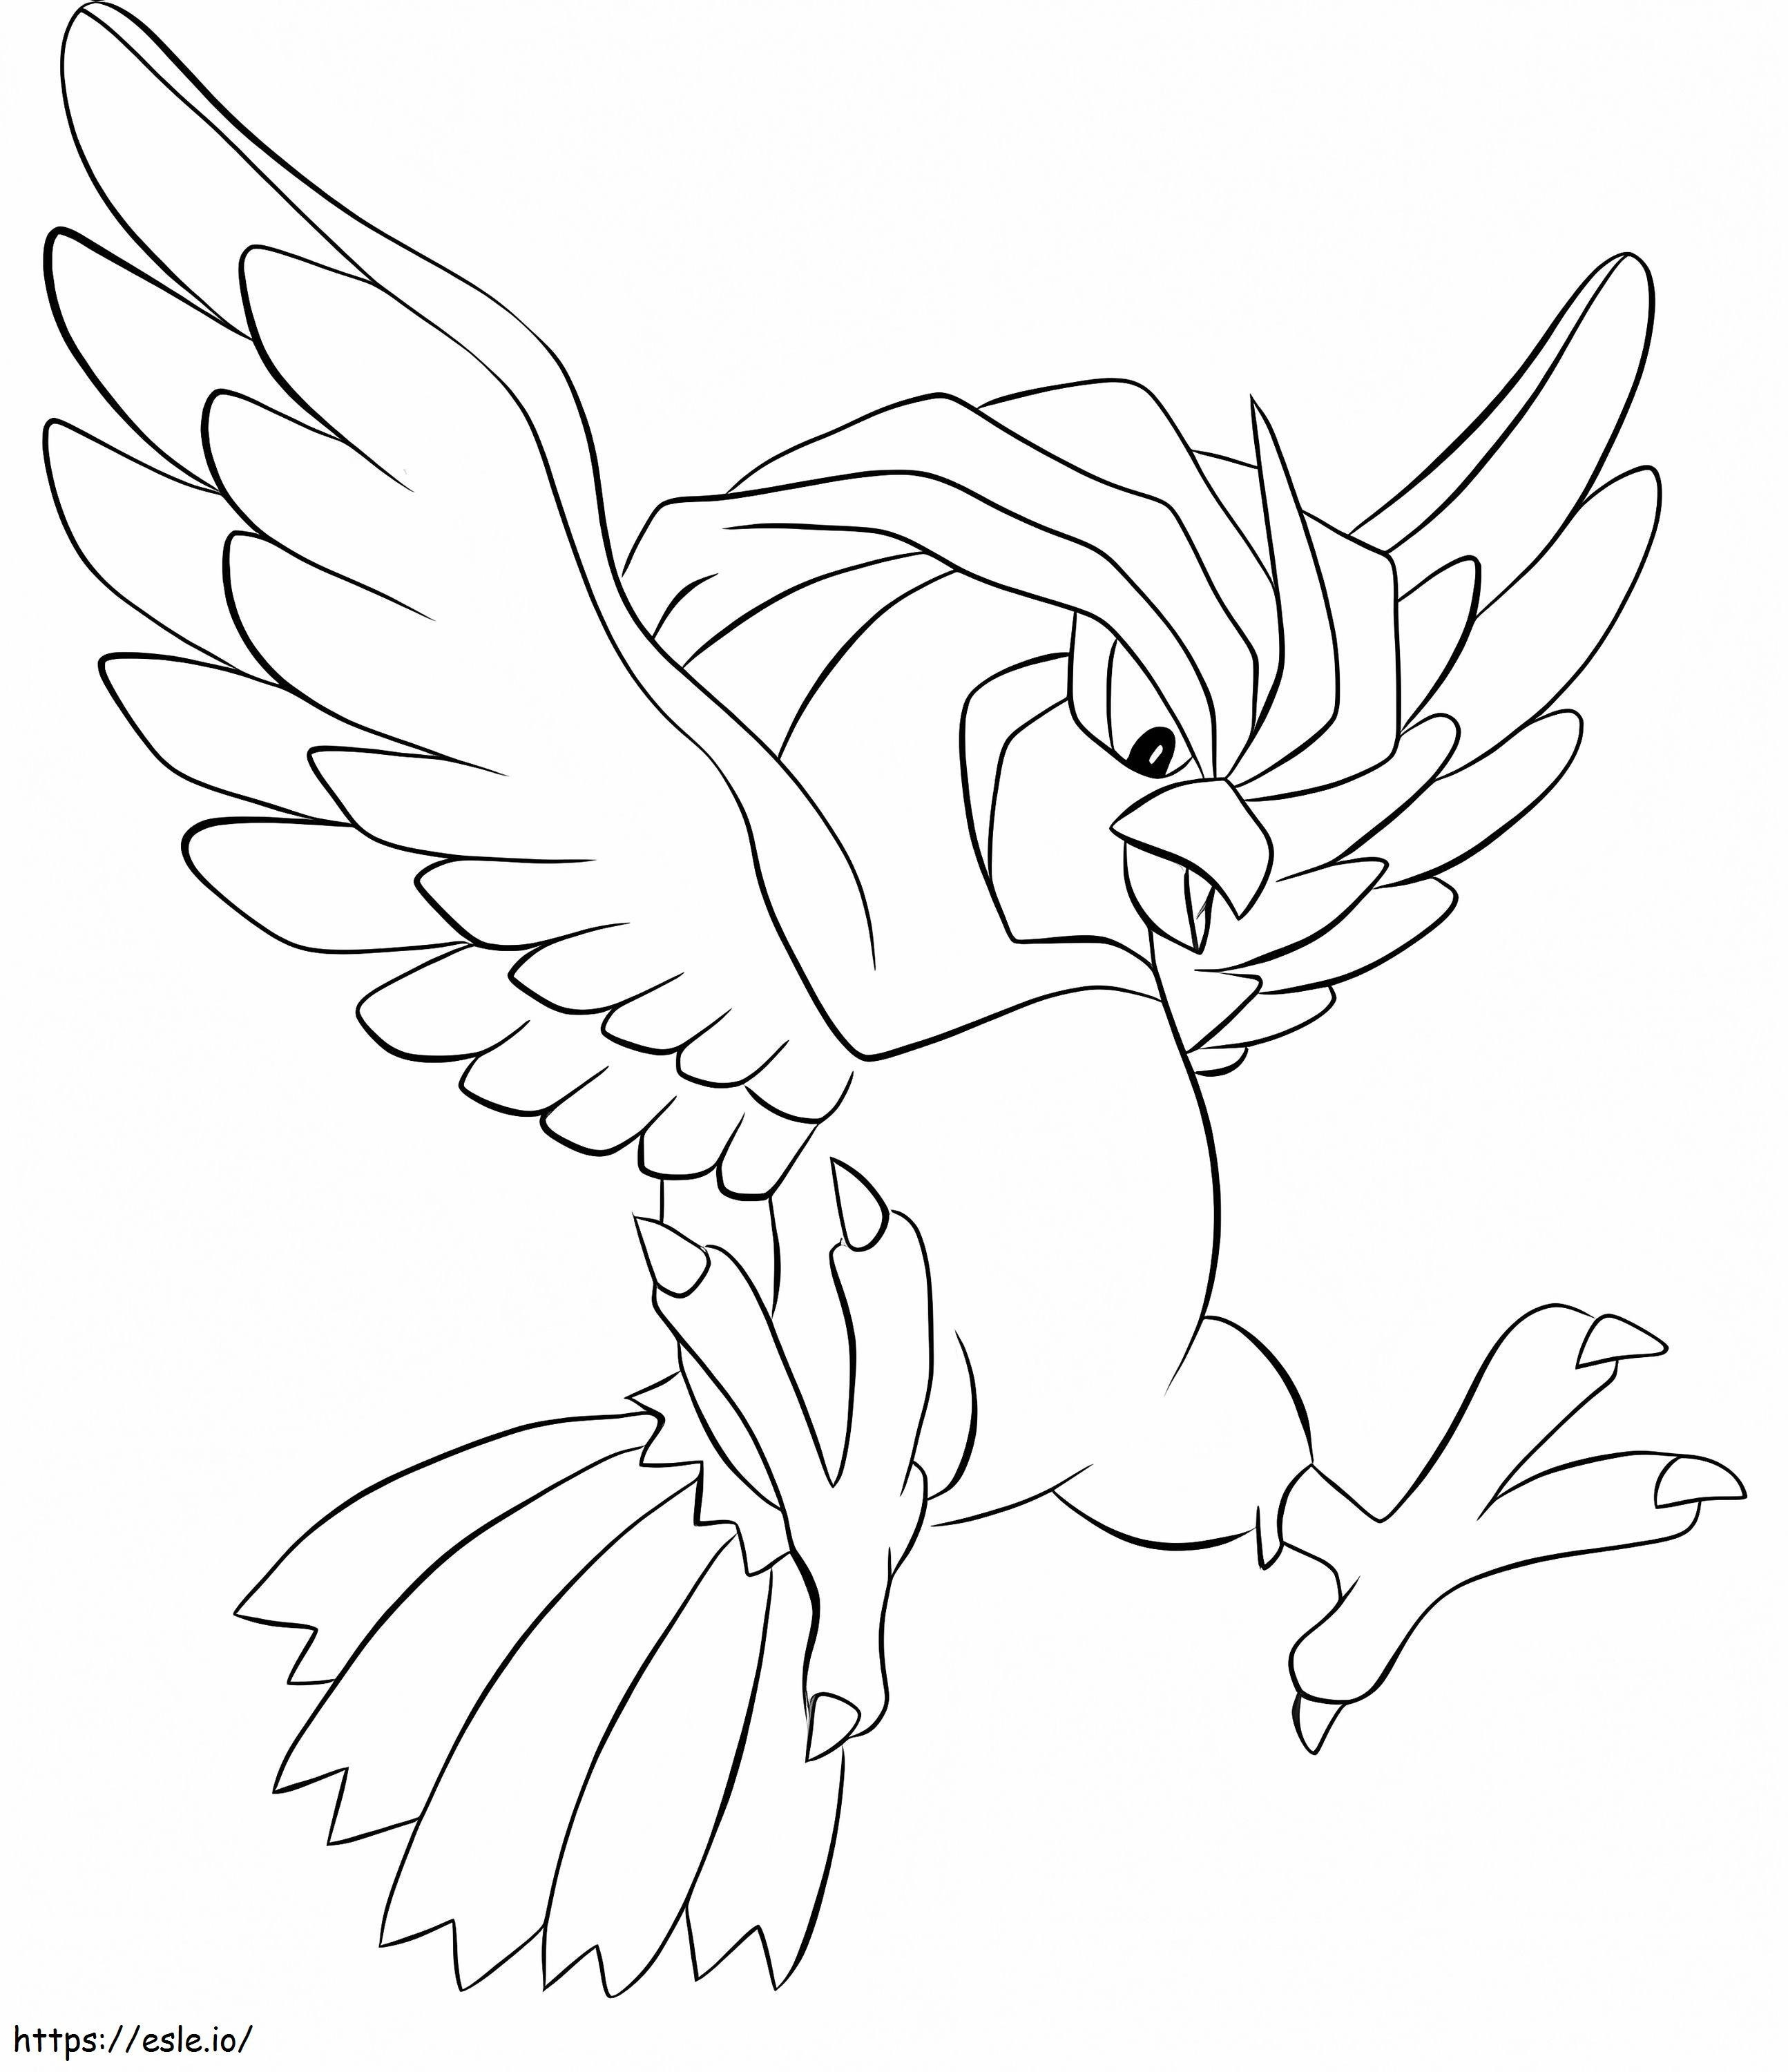 Pidgeotto 1 coloring page